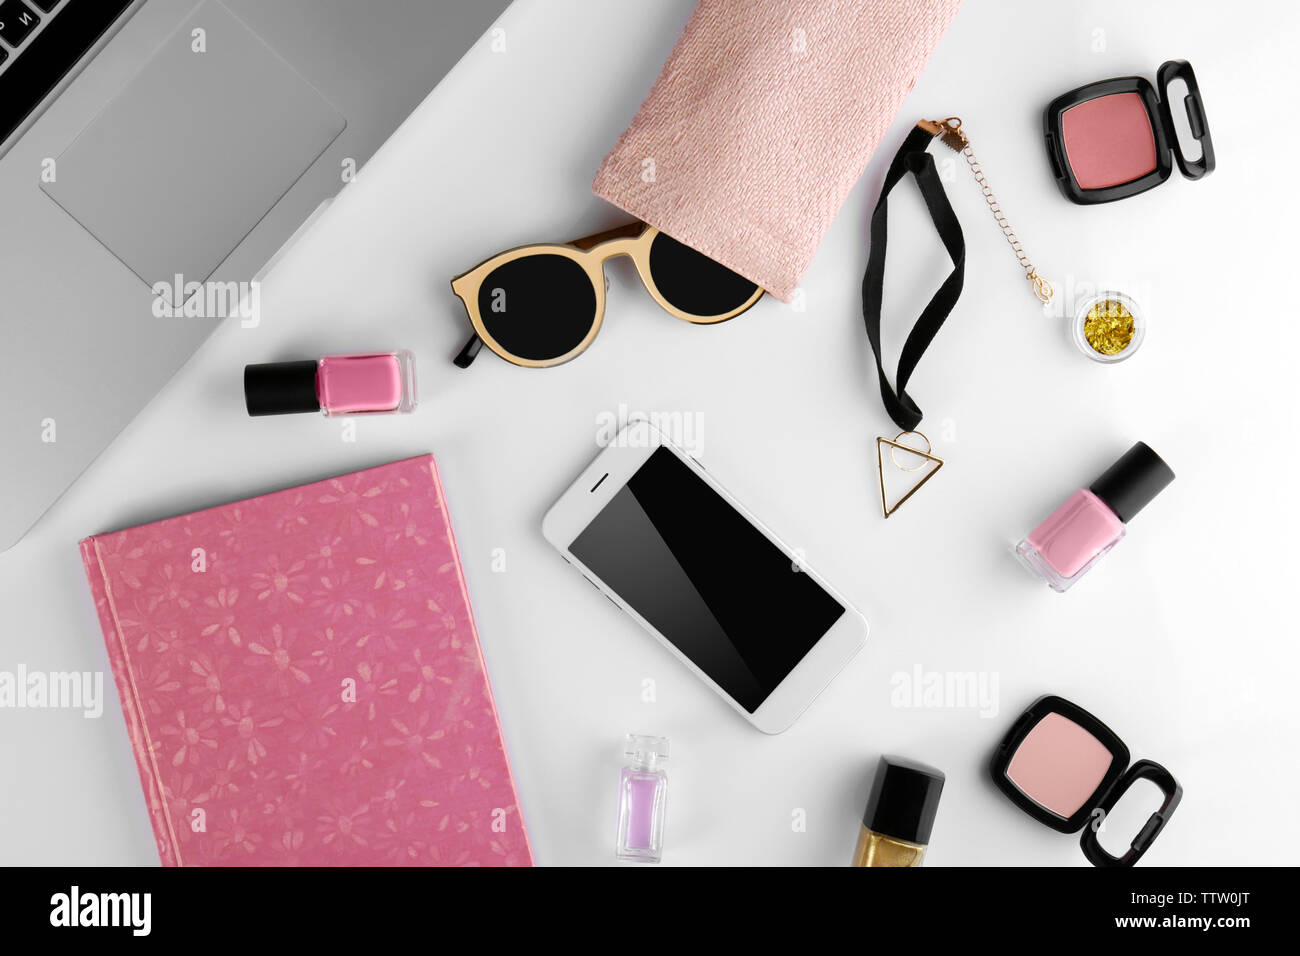 Accessories Collection Stock Illustration - Download Image Now